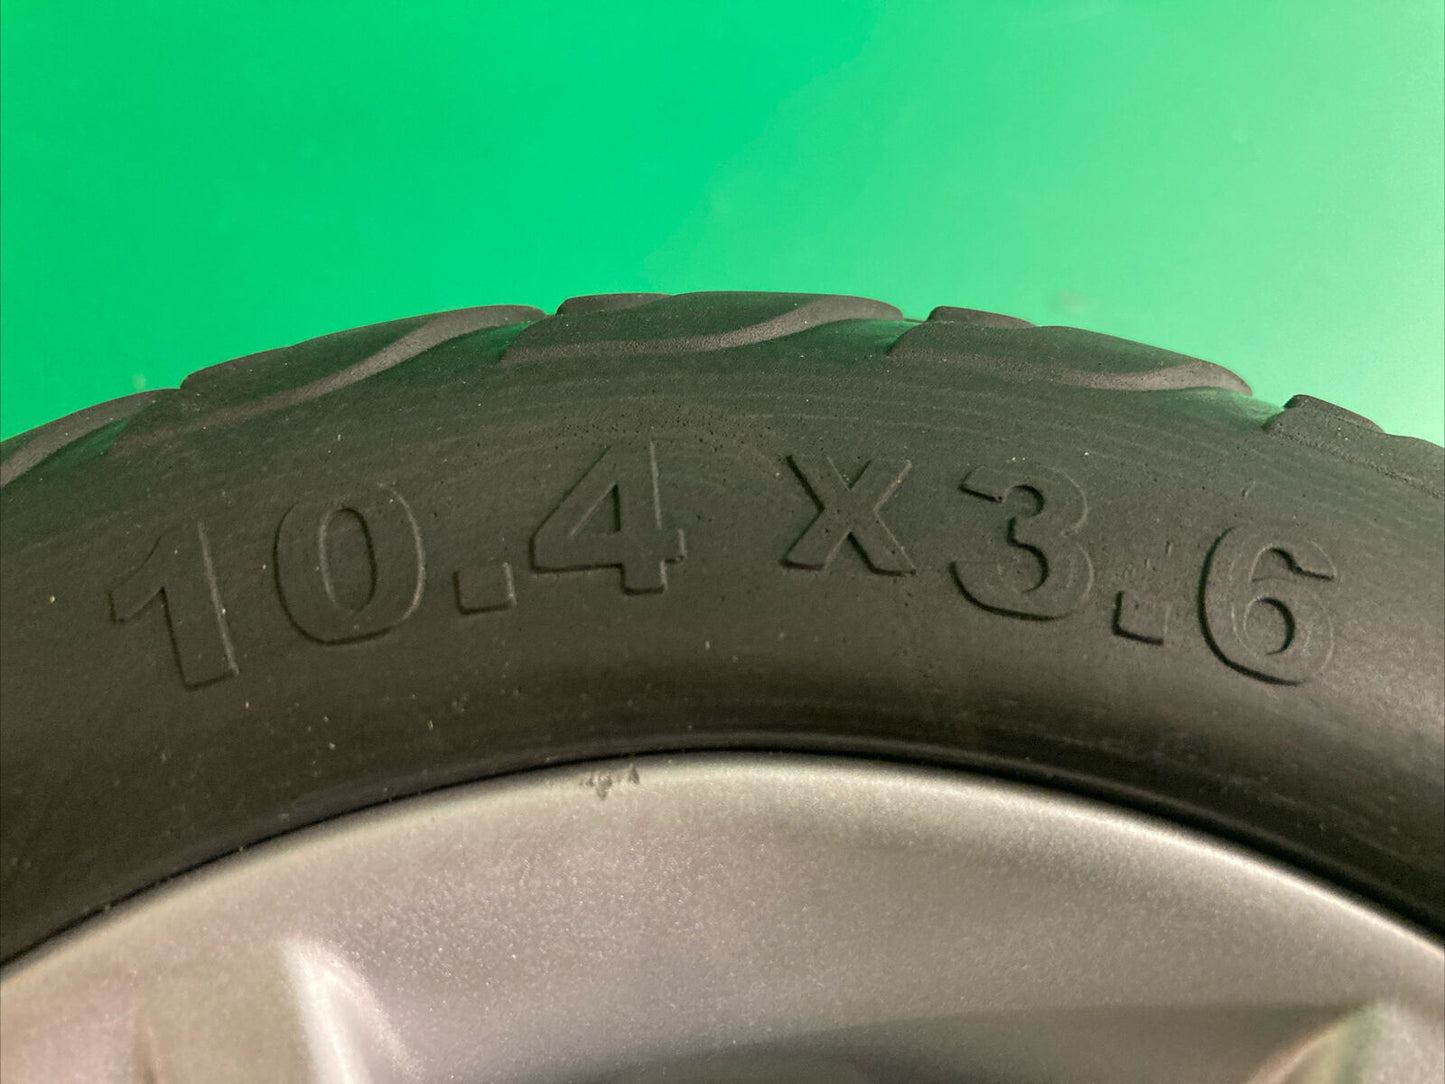 10.4 x 3.6 (P-124) Front Wheel for the Pride Victory 10 Scooter FULL TREAD #i959